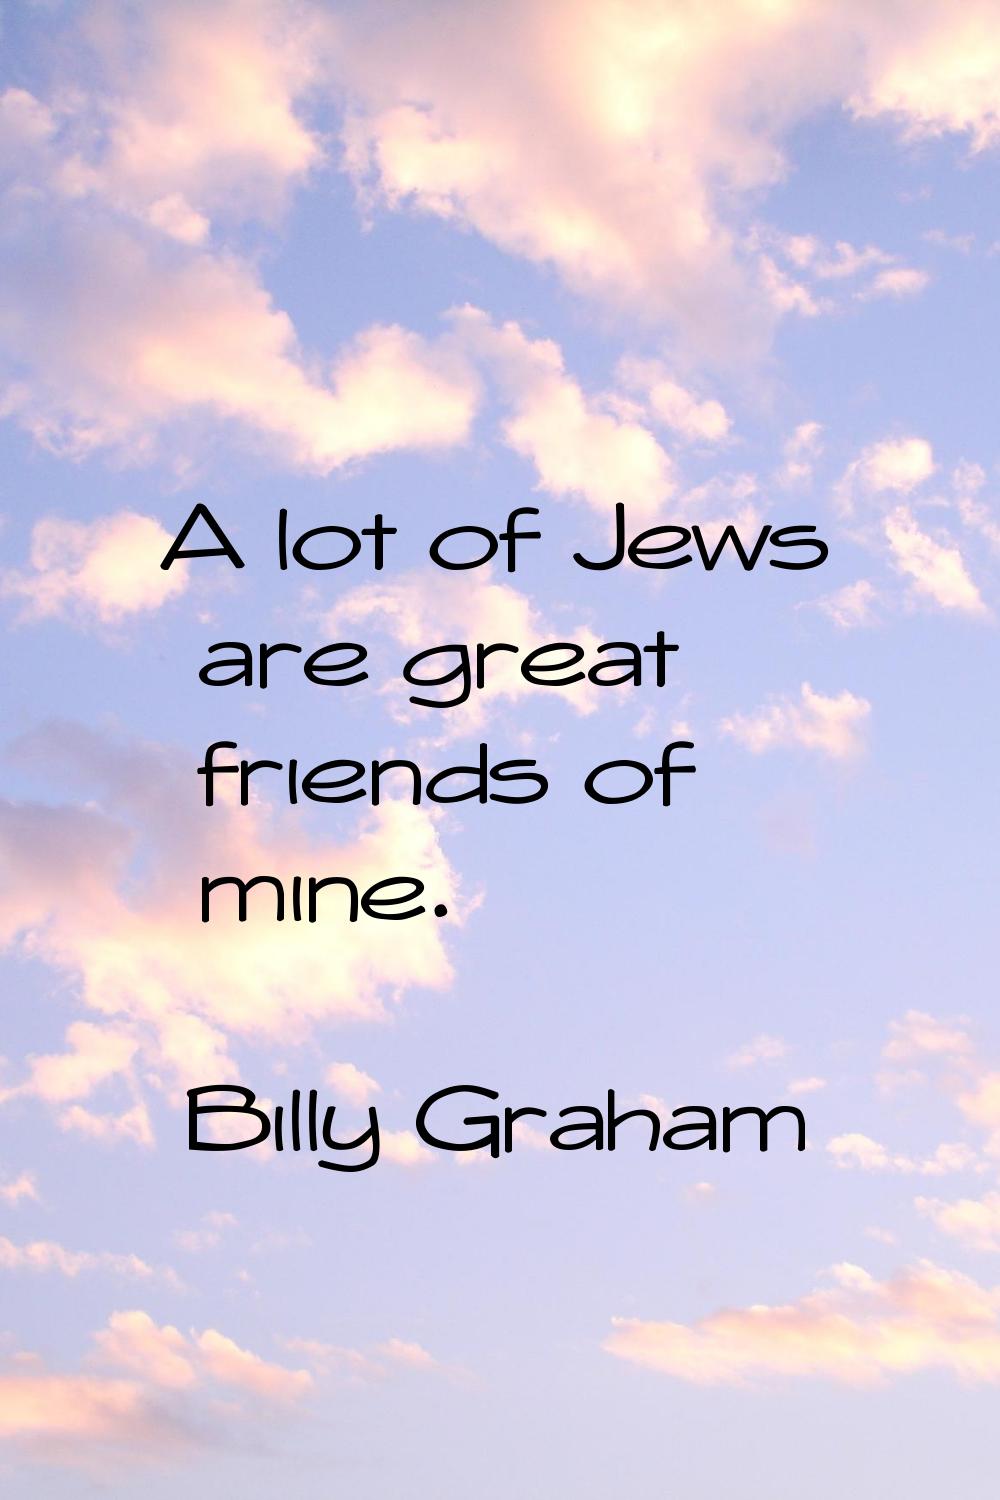 A lot of Jews are great friends of mine.